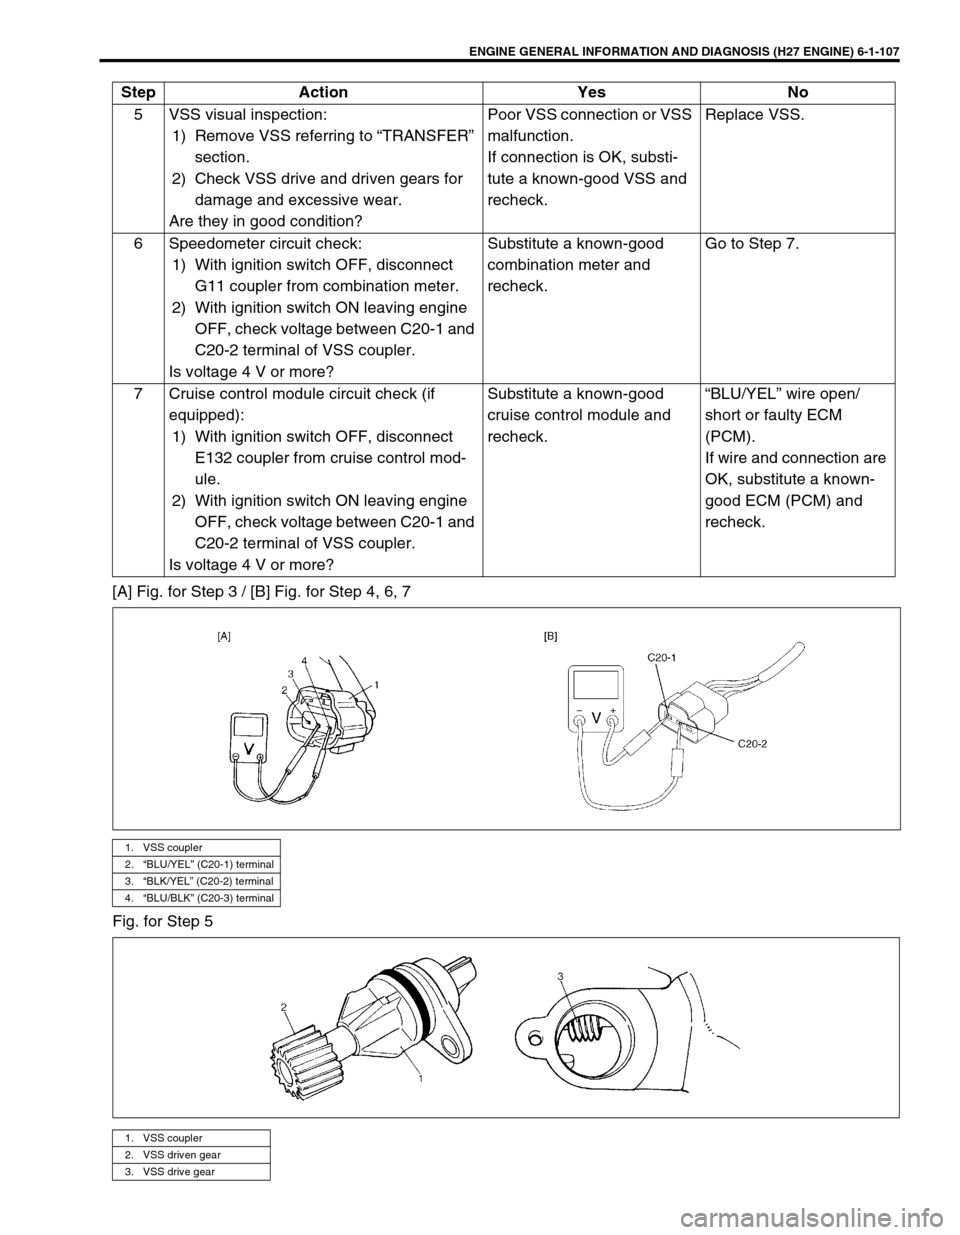 SUZUKI GRAND VITARA 1999 2.G Owners Manual ENGINE GENERAL INFORMATION AND DIAGNOSIS (H27 ENGINE) 6-1-107
[A] Fig. for Step 3 / [B] Fig. for Step 4, 6, 7
Fig. for Step 55 VSS visual inspection:
1) Remove VSS referring to “TRANSFER” 
section